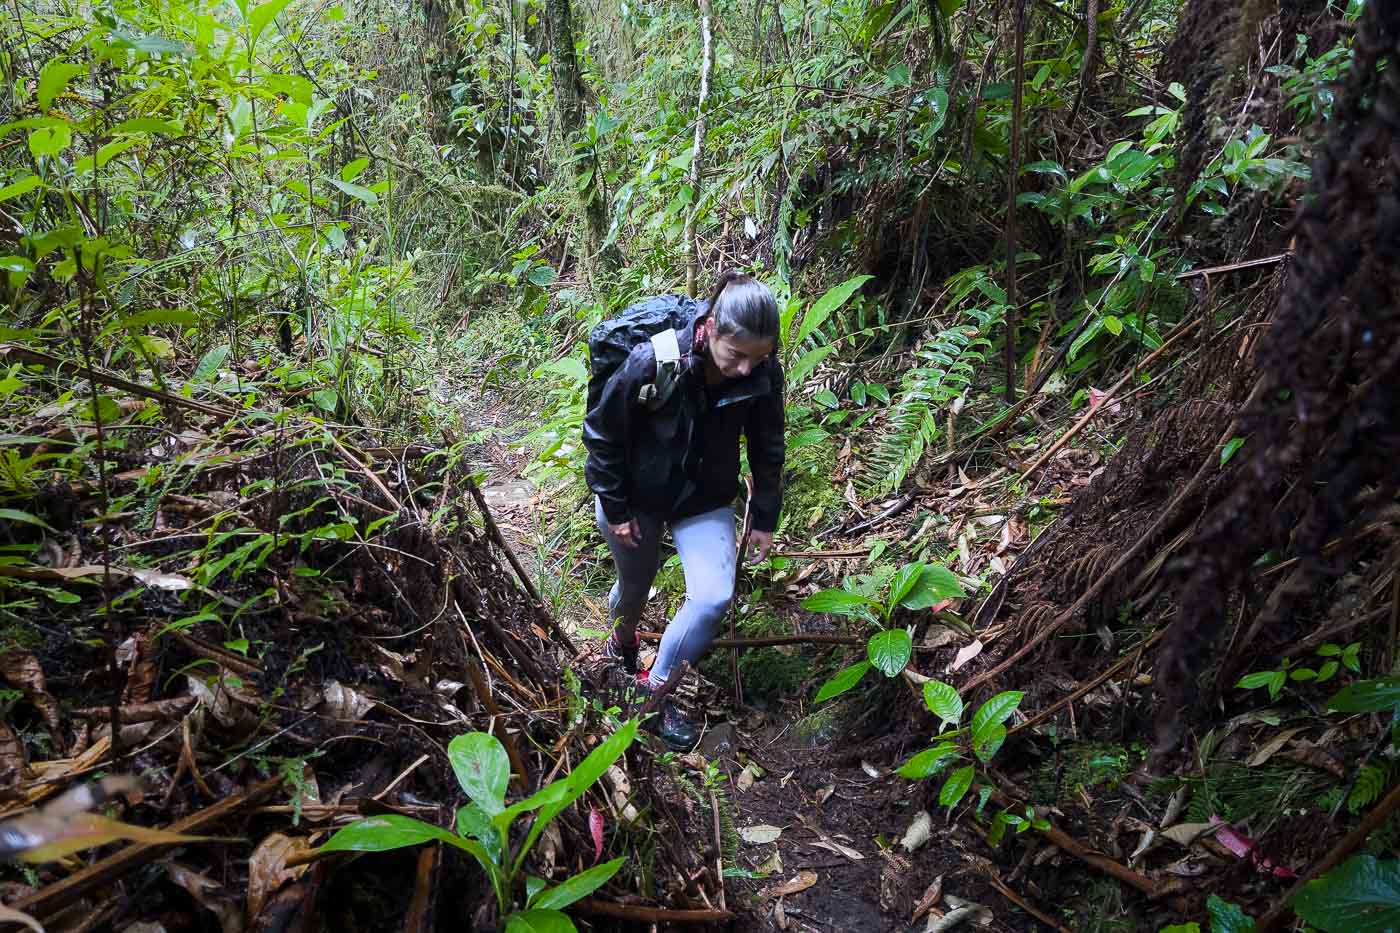 Sara looking tired as she walks along a wild trail in the Colombian rainforest.